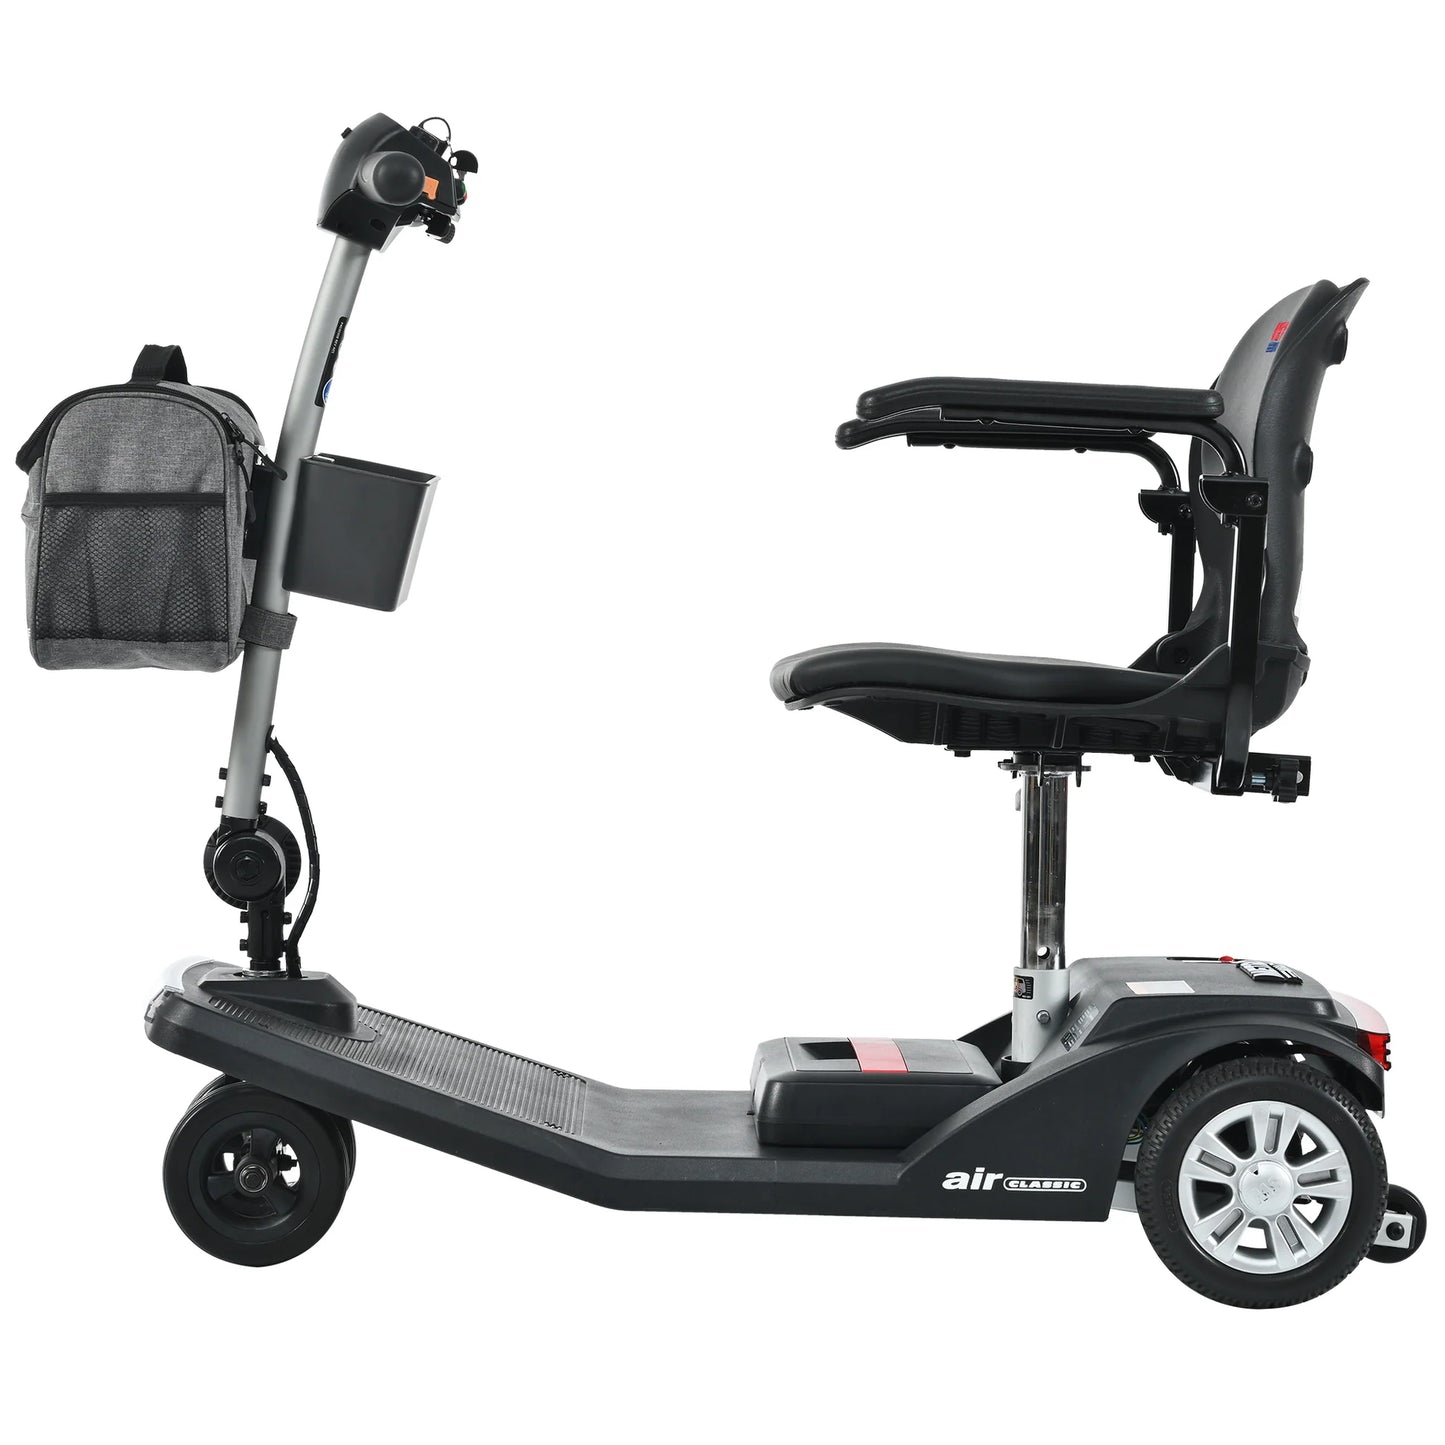 Metro Air Classic Mobility Scooter